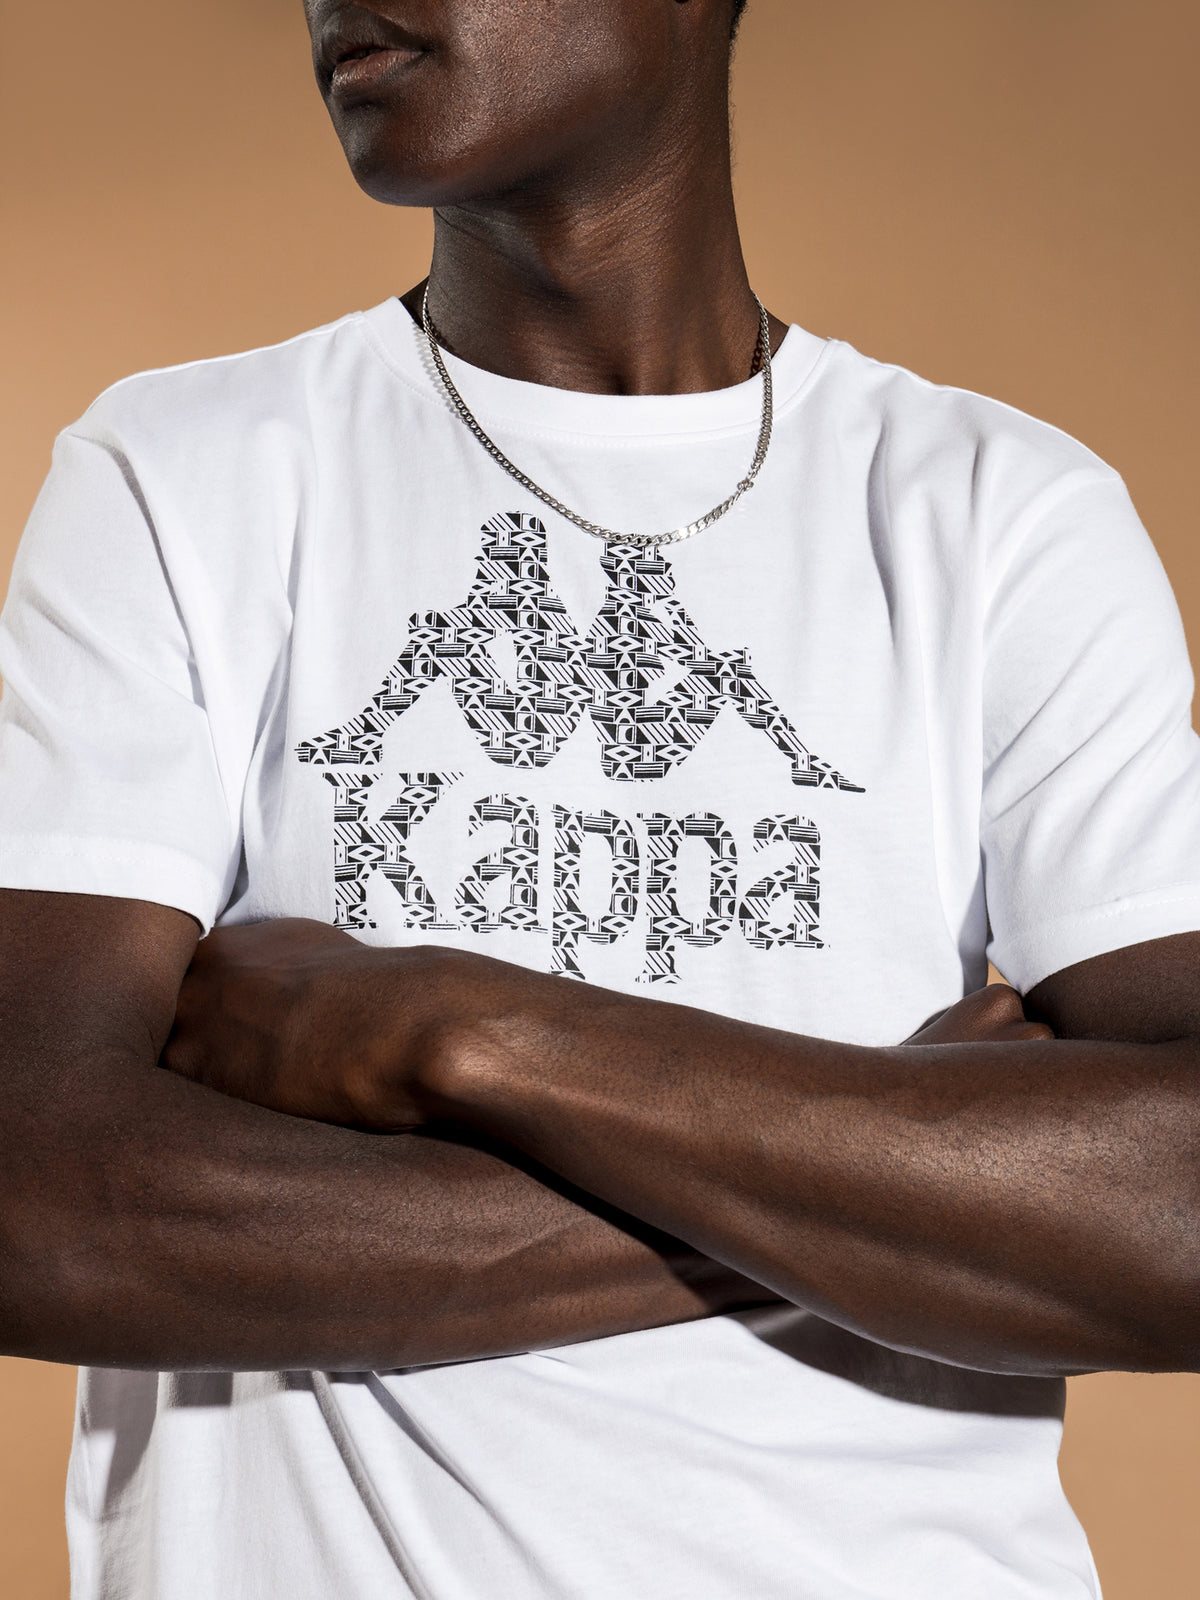 Authentic Ralo Slim-Fit T-Shirt in White